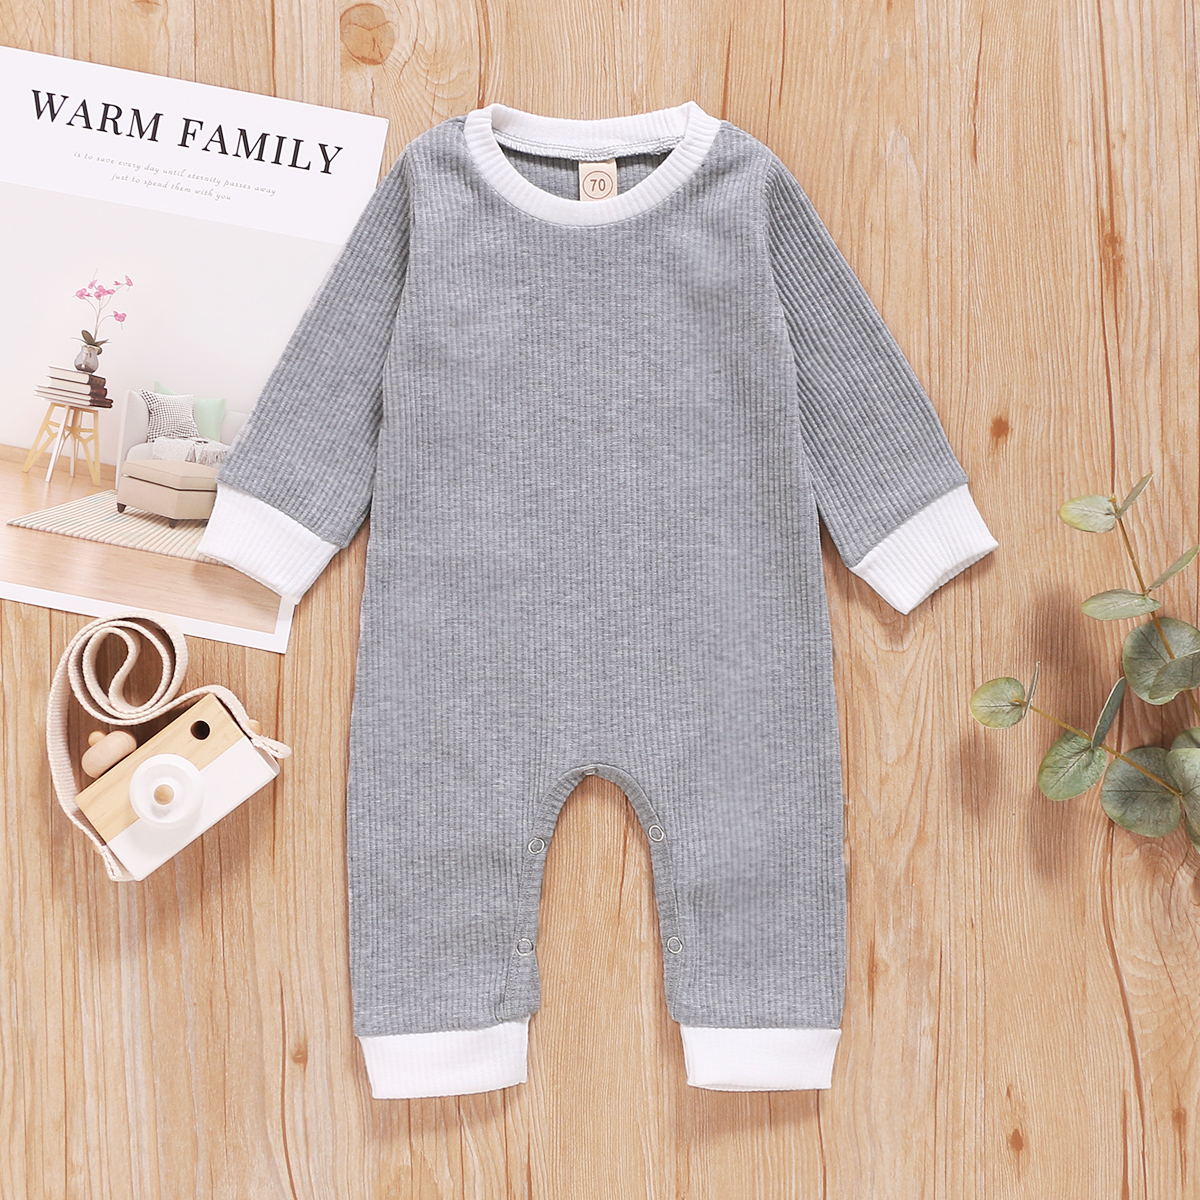 0-18M Newborn Baby Girls Boys Autumn Rompers Solid Long Sleeve Button Casual Jumpsuits Outfits